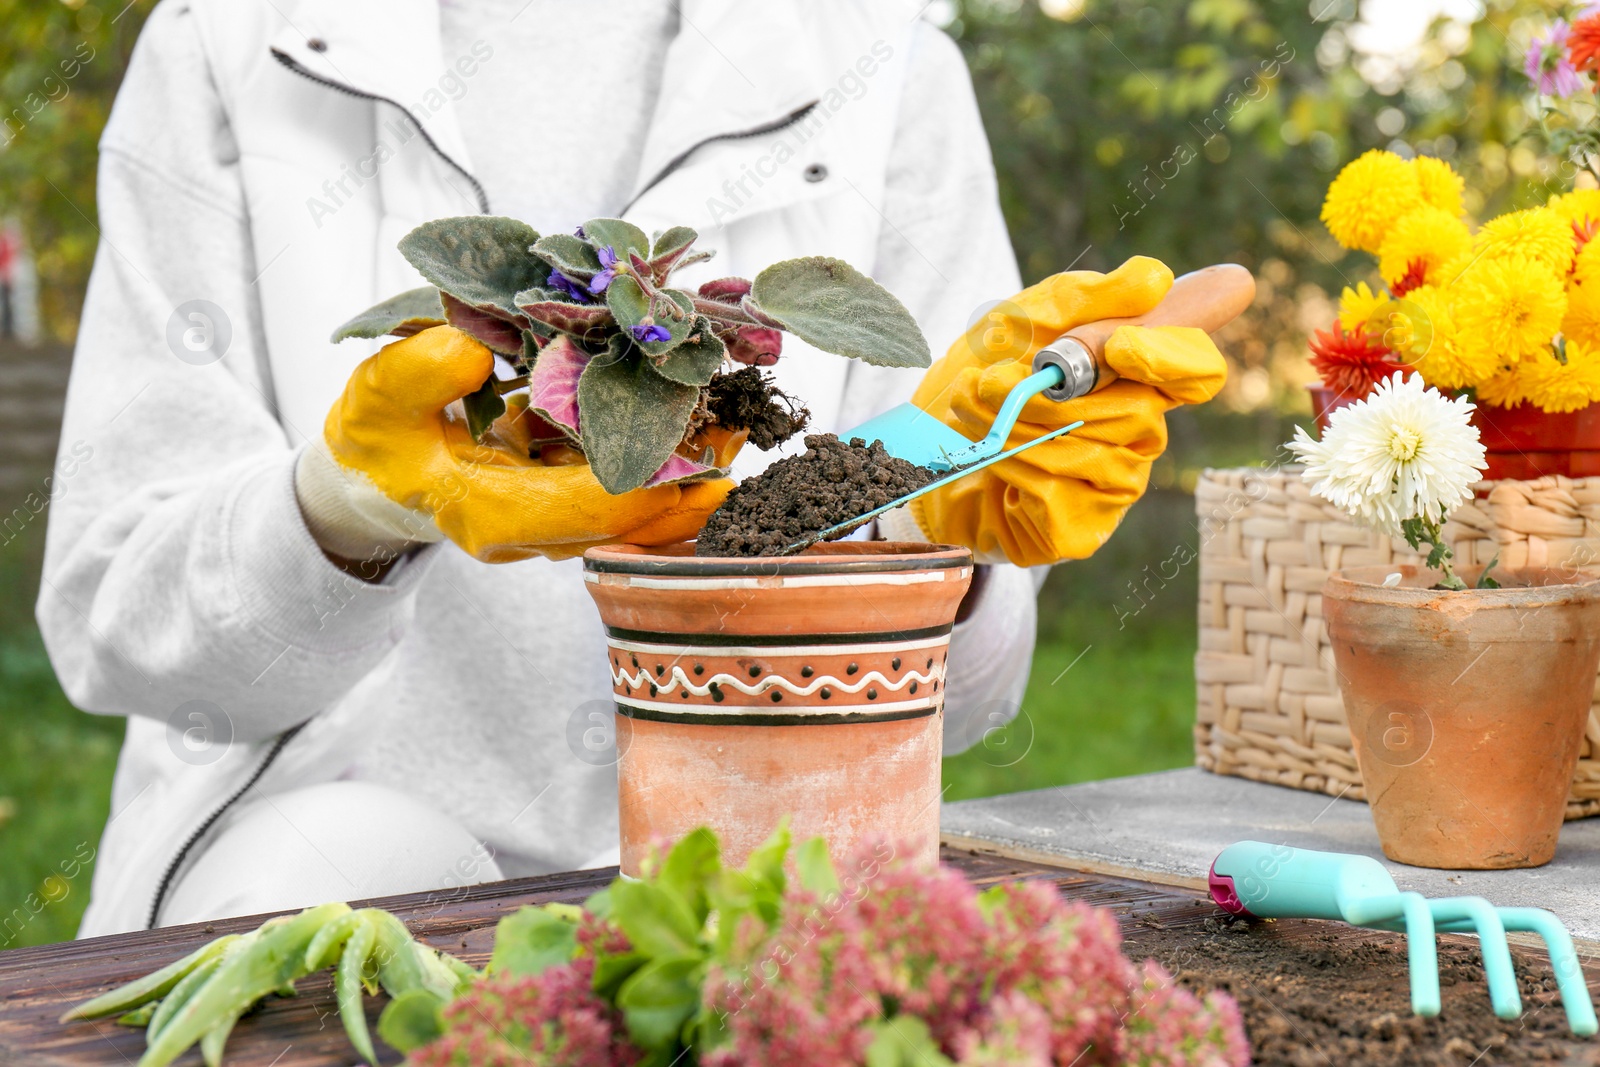 Photo of Woman wearing gardening gloves transplanting flower into pot at wooden table outdoors, closeup